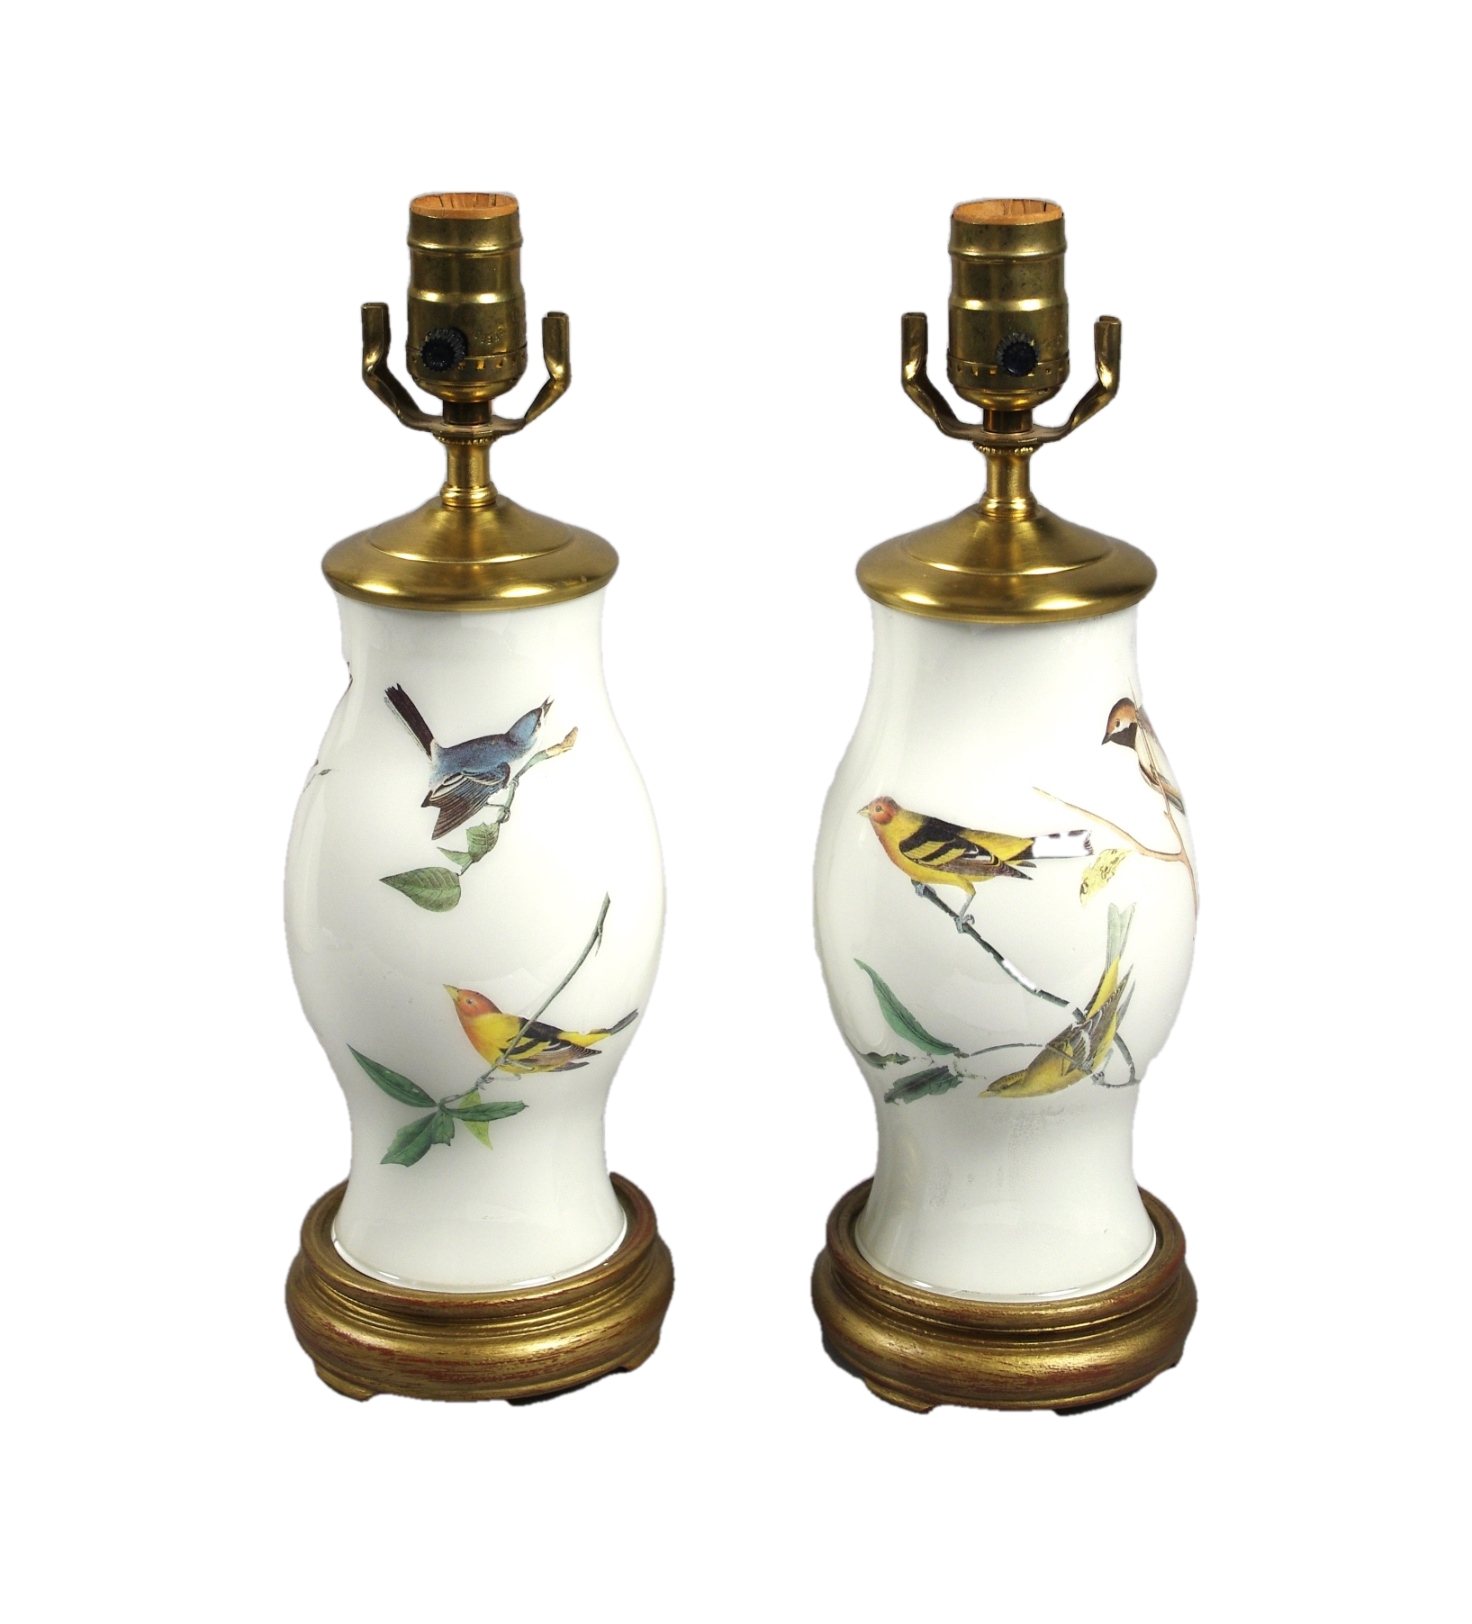 Delightful Pair of Small Decalcomania Lamps